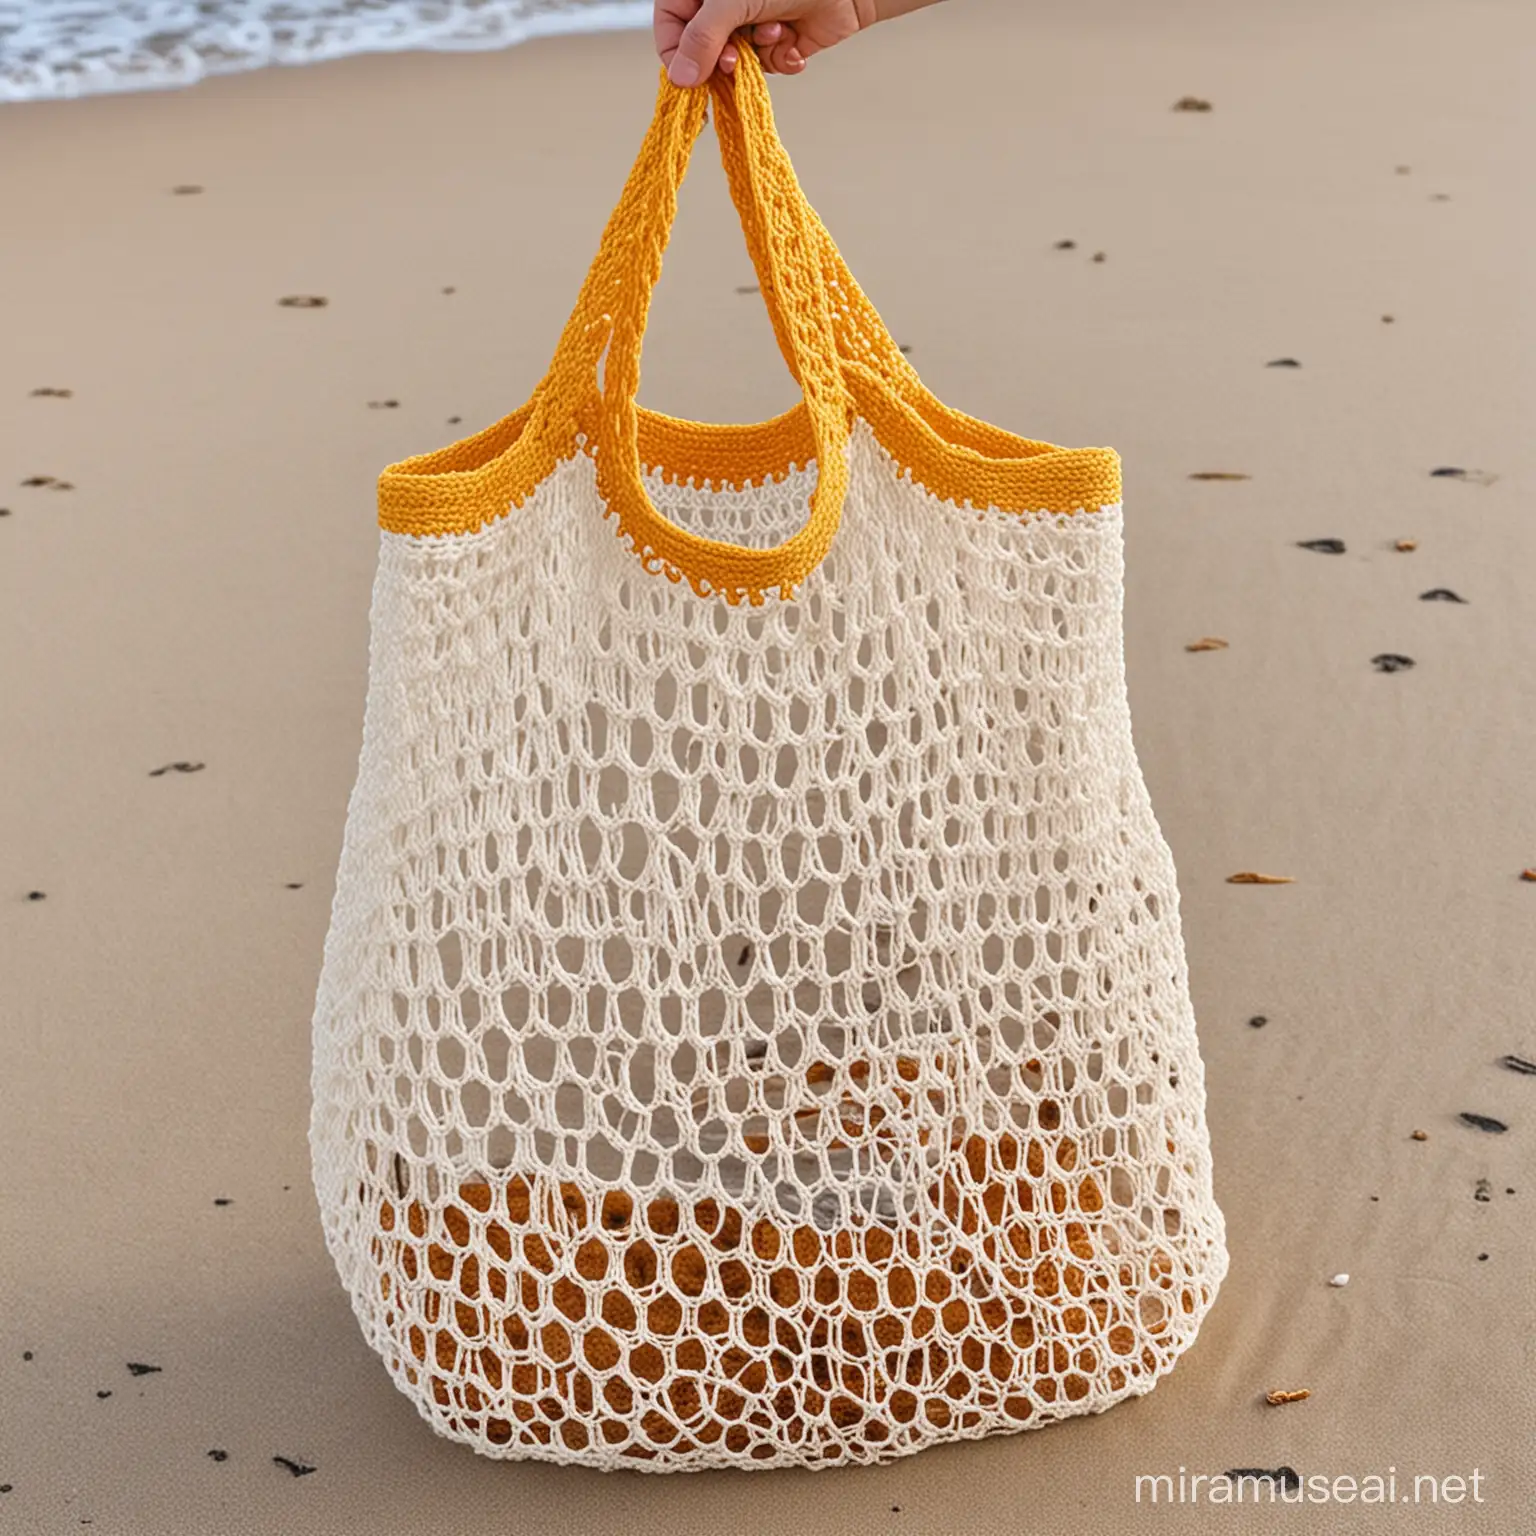 create a crochet mesh net empty grocery bag with a beach background